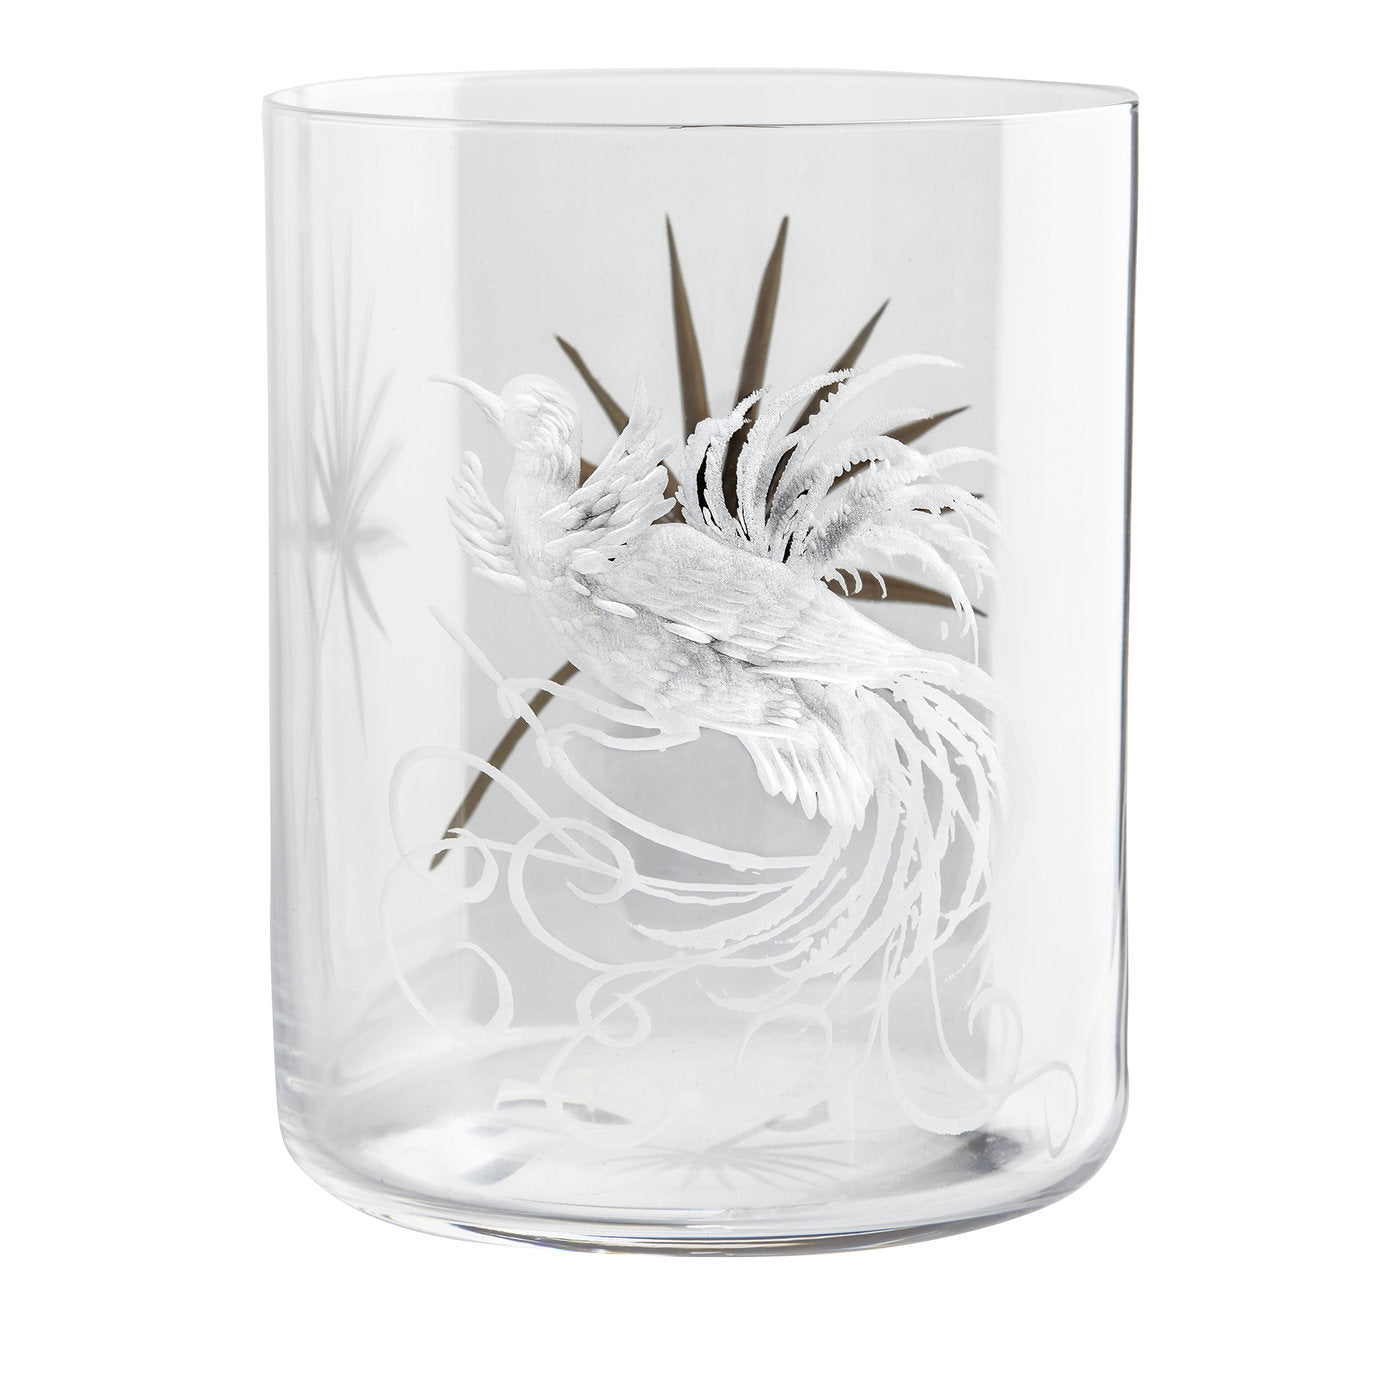 Set of 6 Birds of paradise Crystal Glasses - Alternative view 1